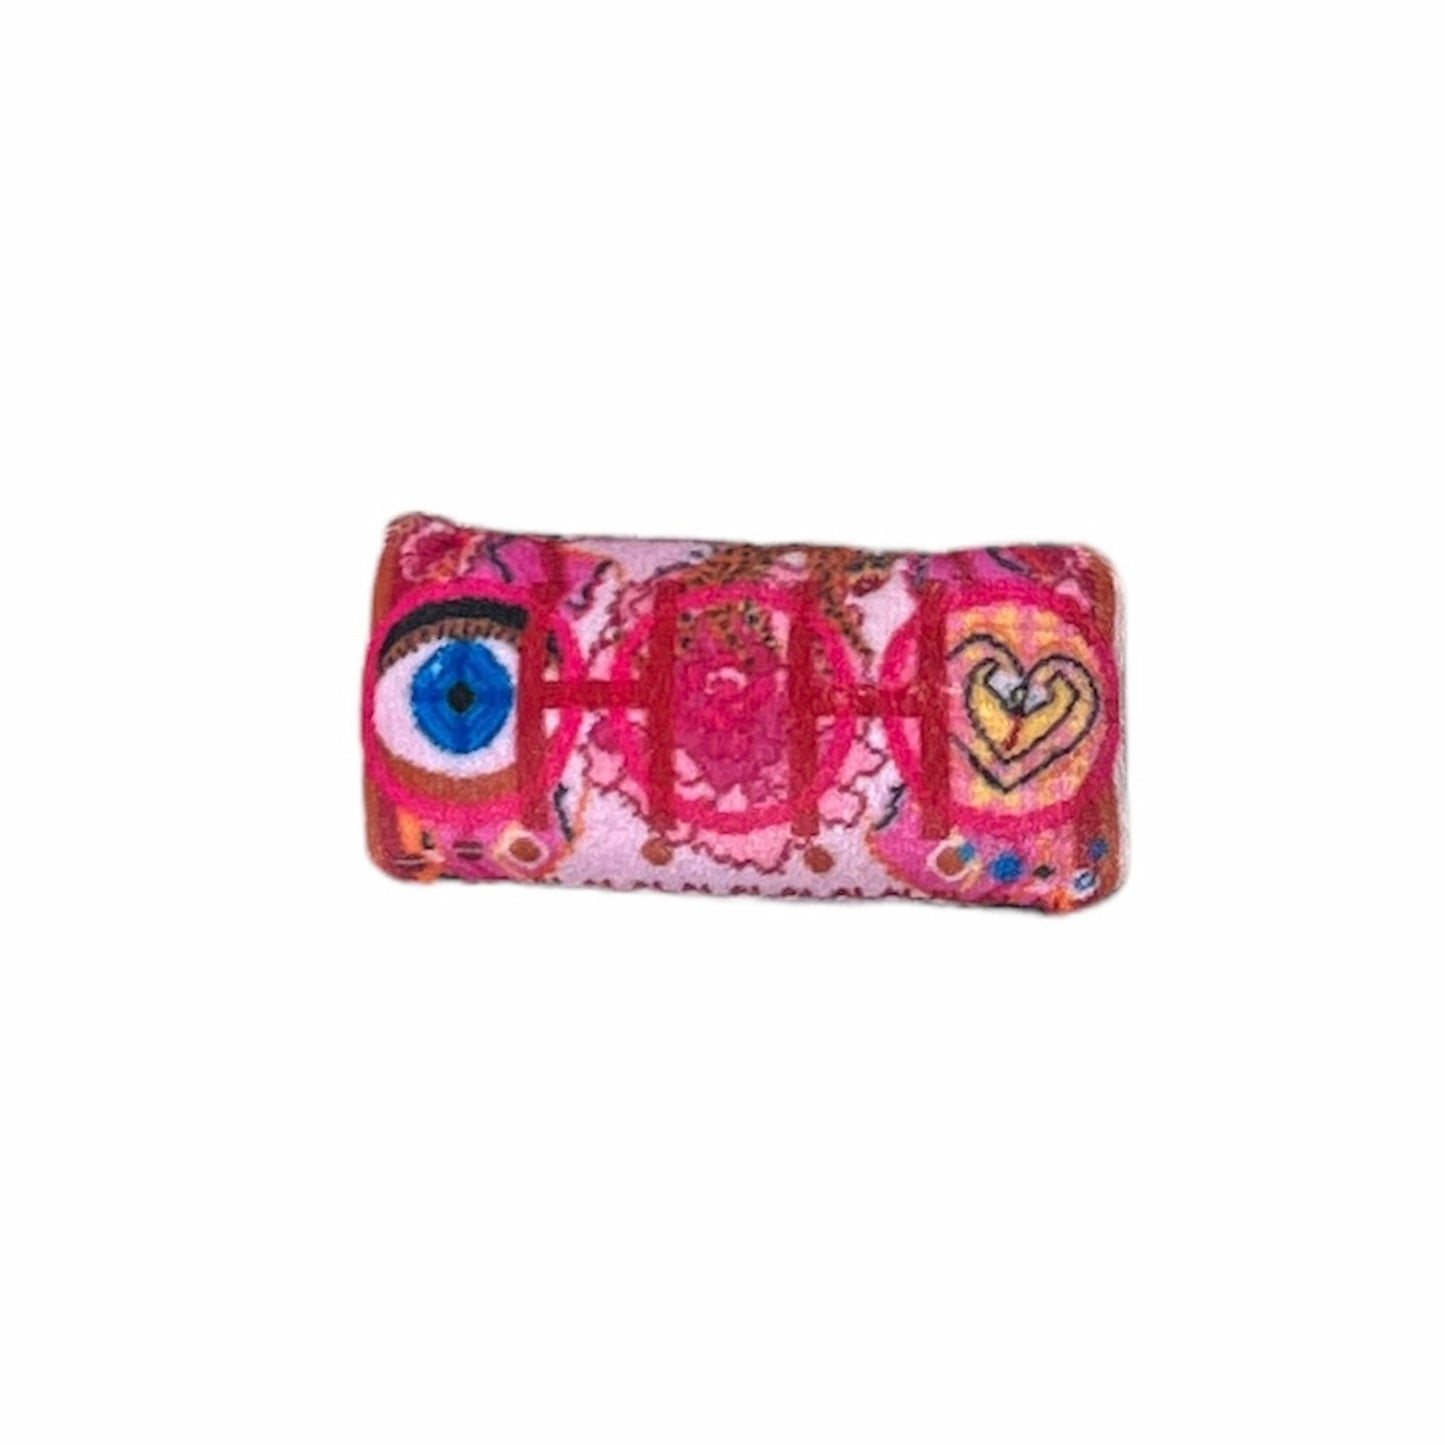 pink toned velvet lavender sachet features an evil eye, cougar with big lips & kissing snakes